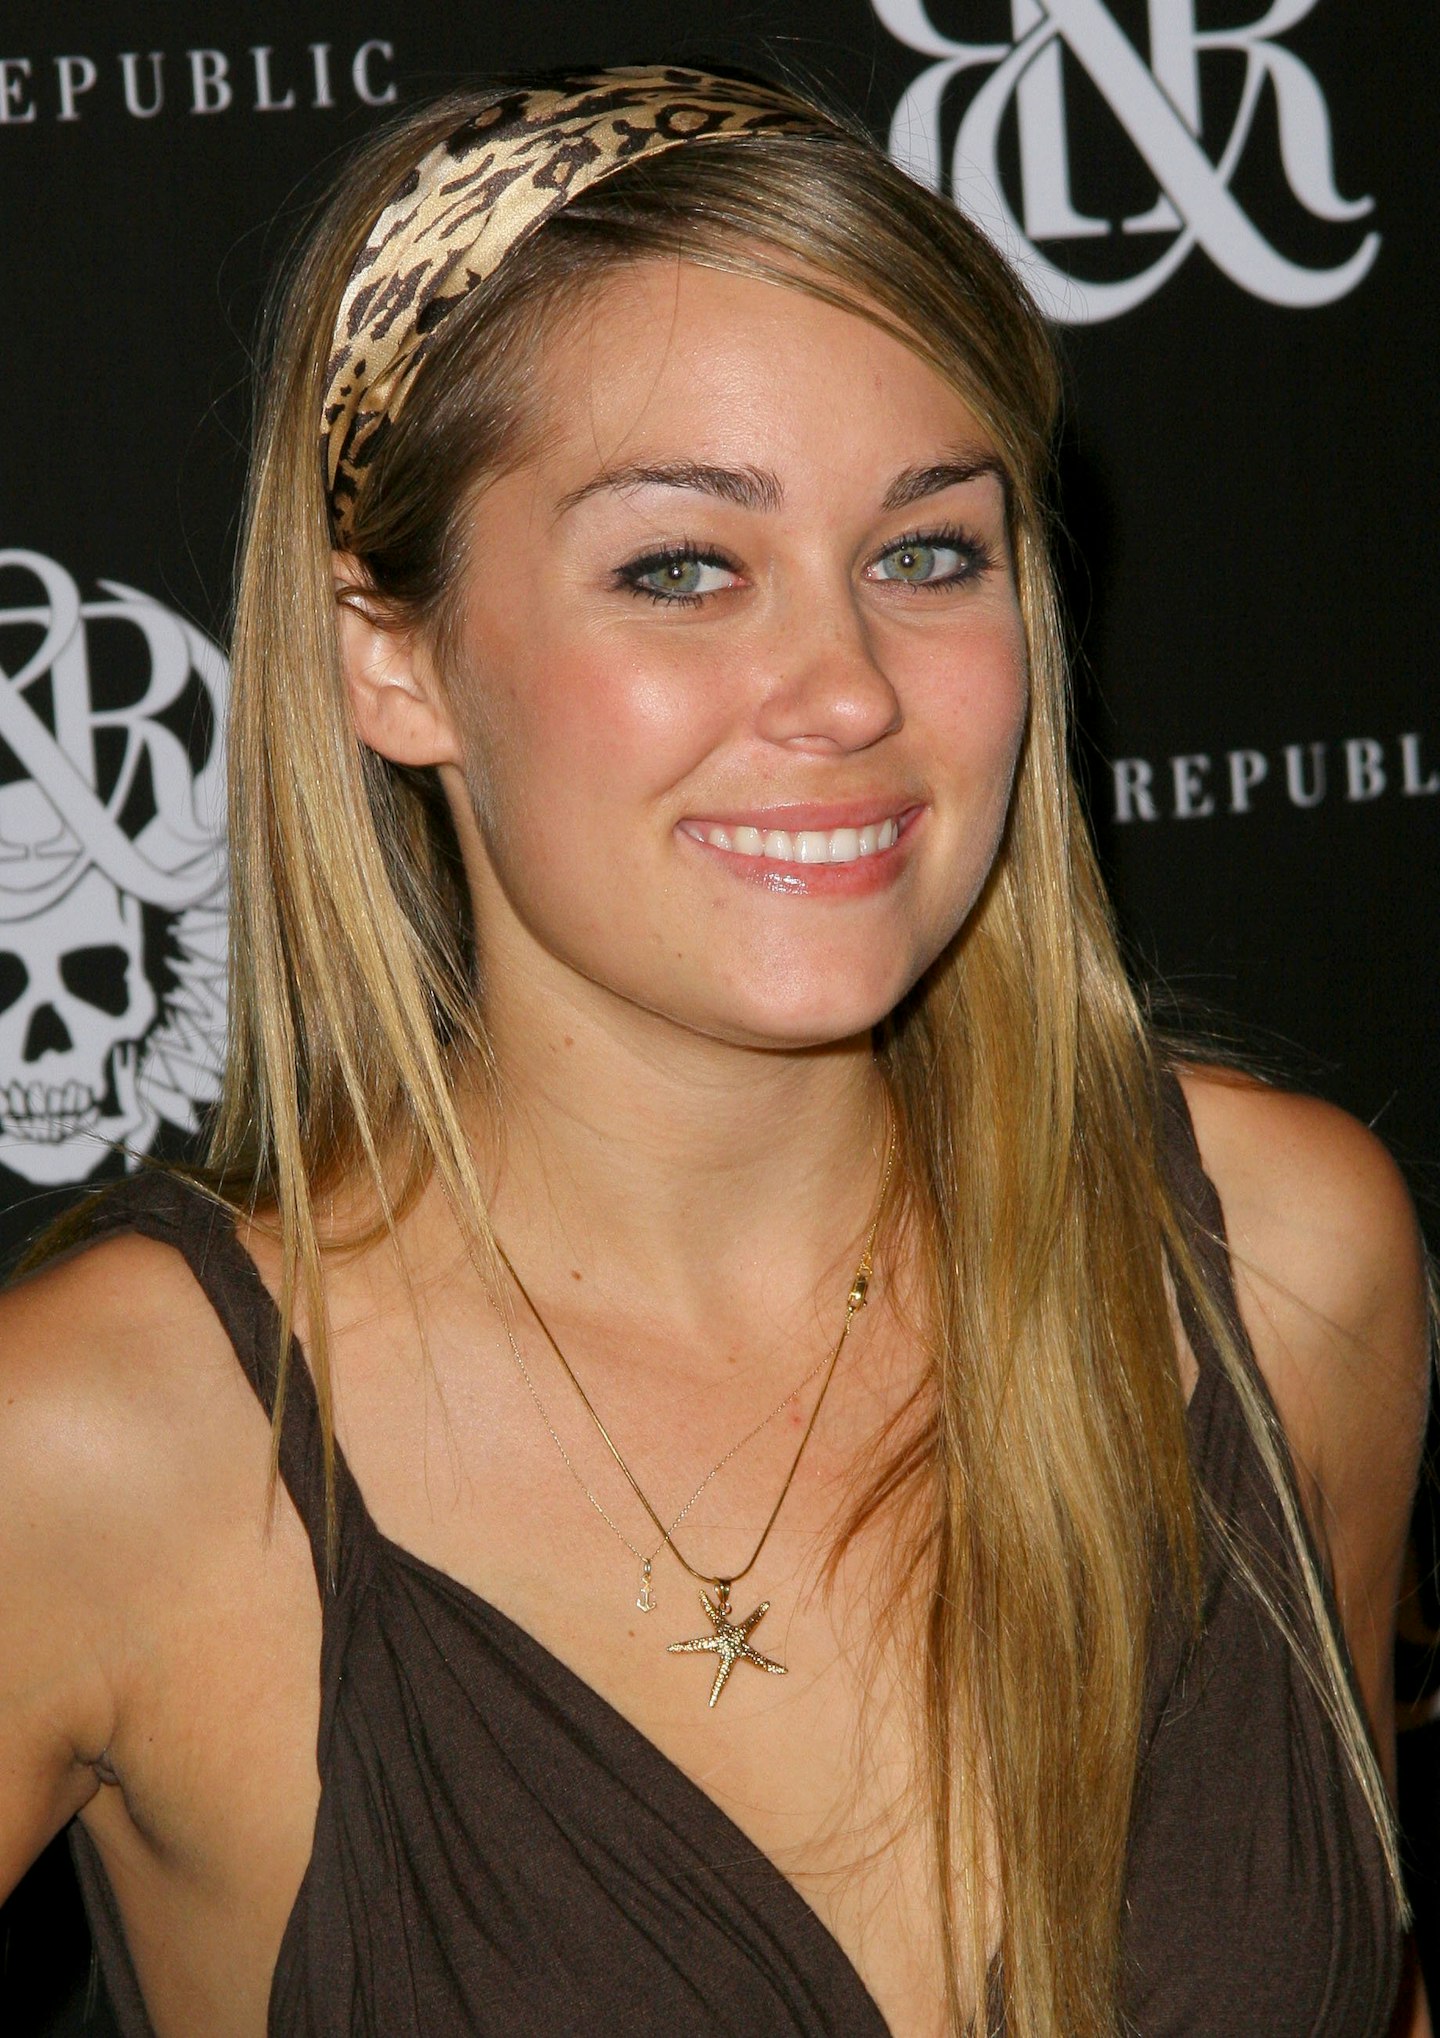 Lauren Conrad leaving the gym in Hollywood 2008-06-17 - FamousFix